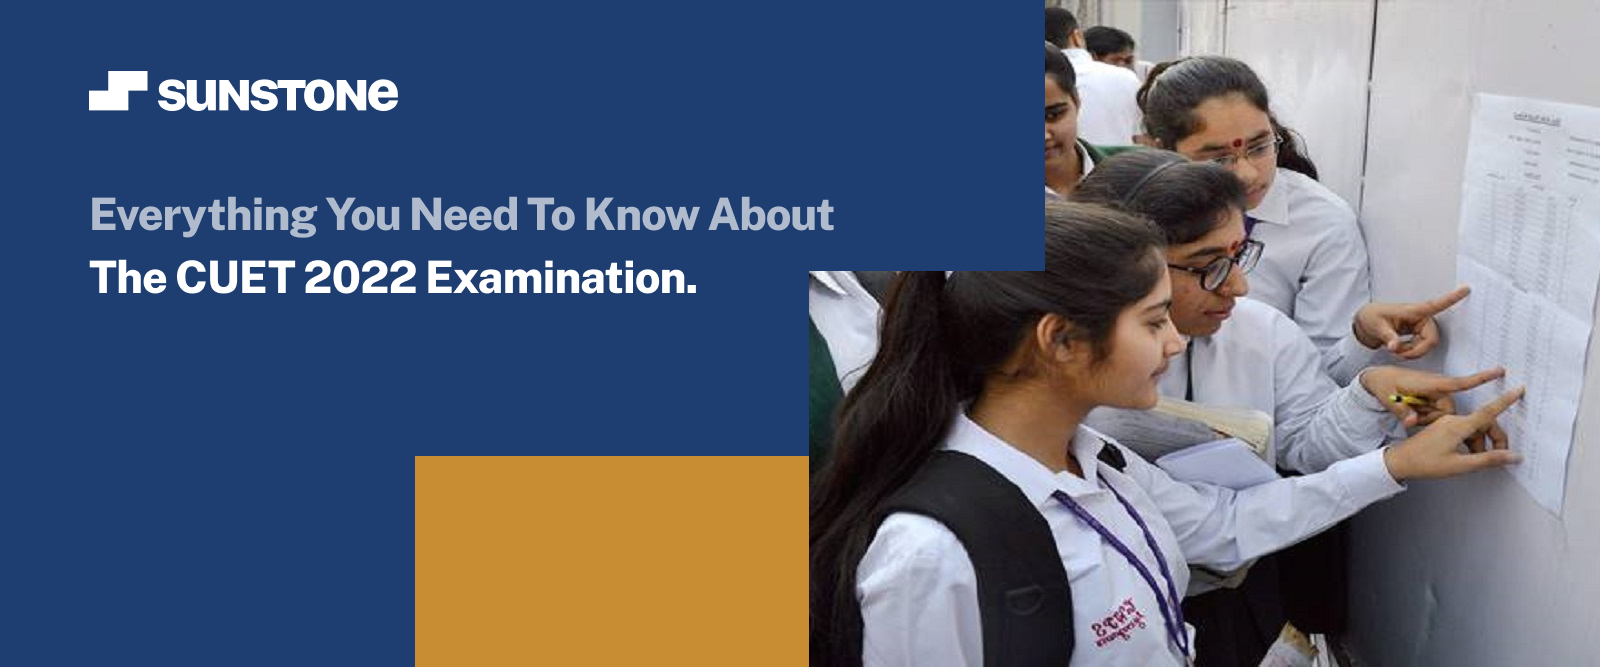 Everything You Need To Know About The CUET 2022 Examination